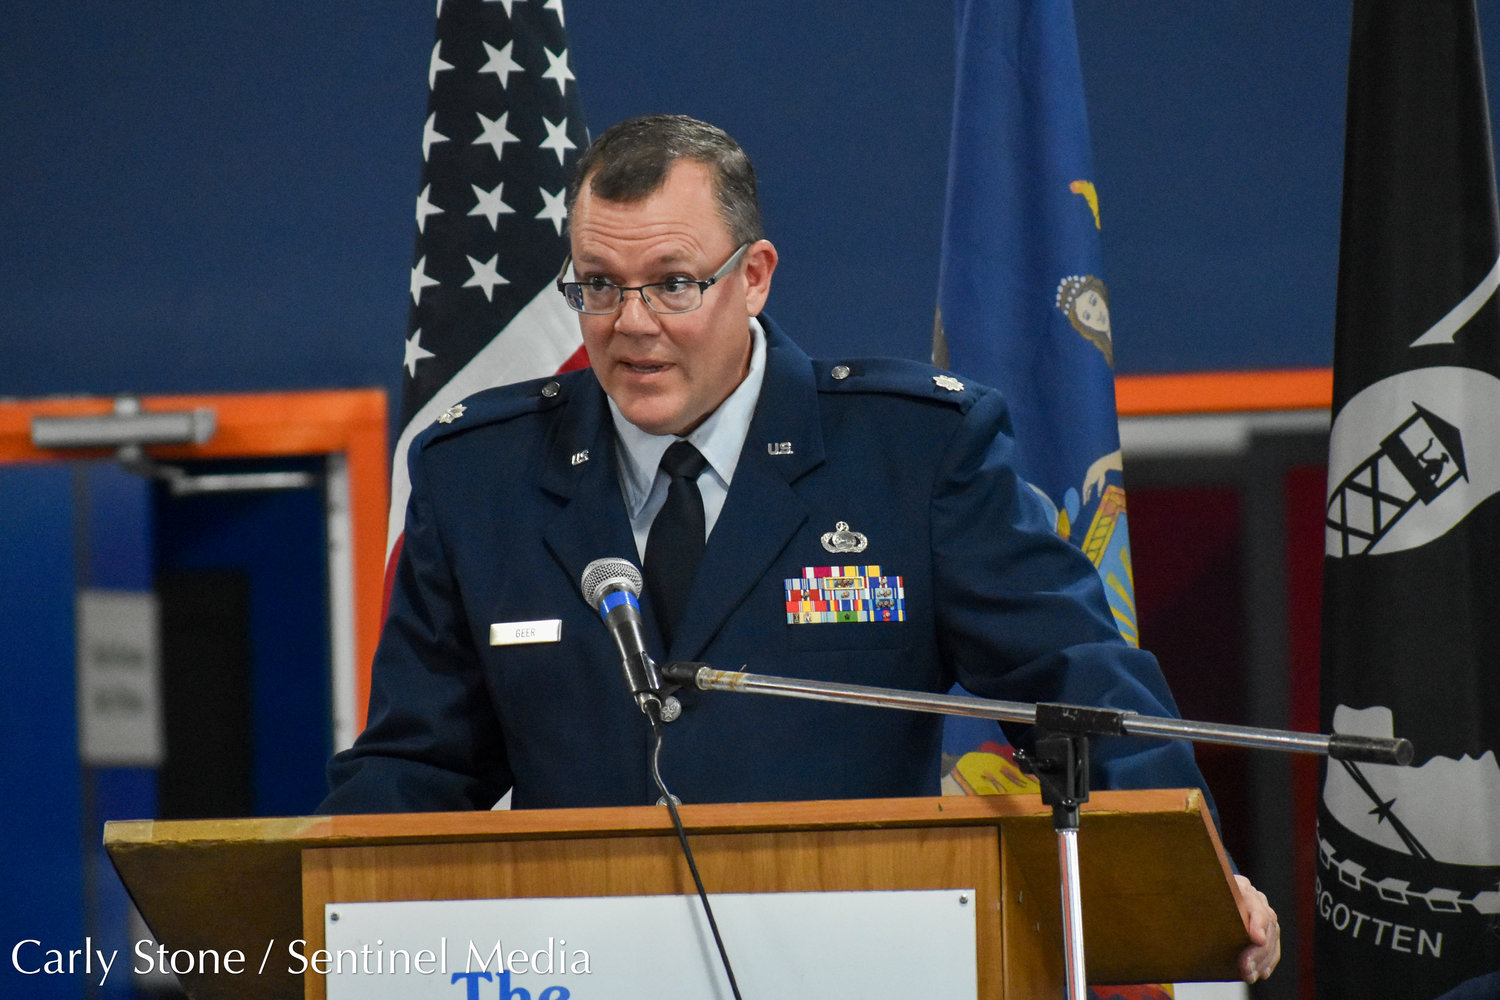 The keynote speaker for the 8th Annual Flags for Heroes Recognition Ceremony was Lt. Col. Michael T. Geer, U.S. Air Force.